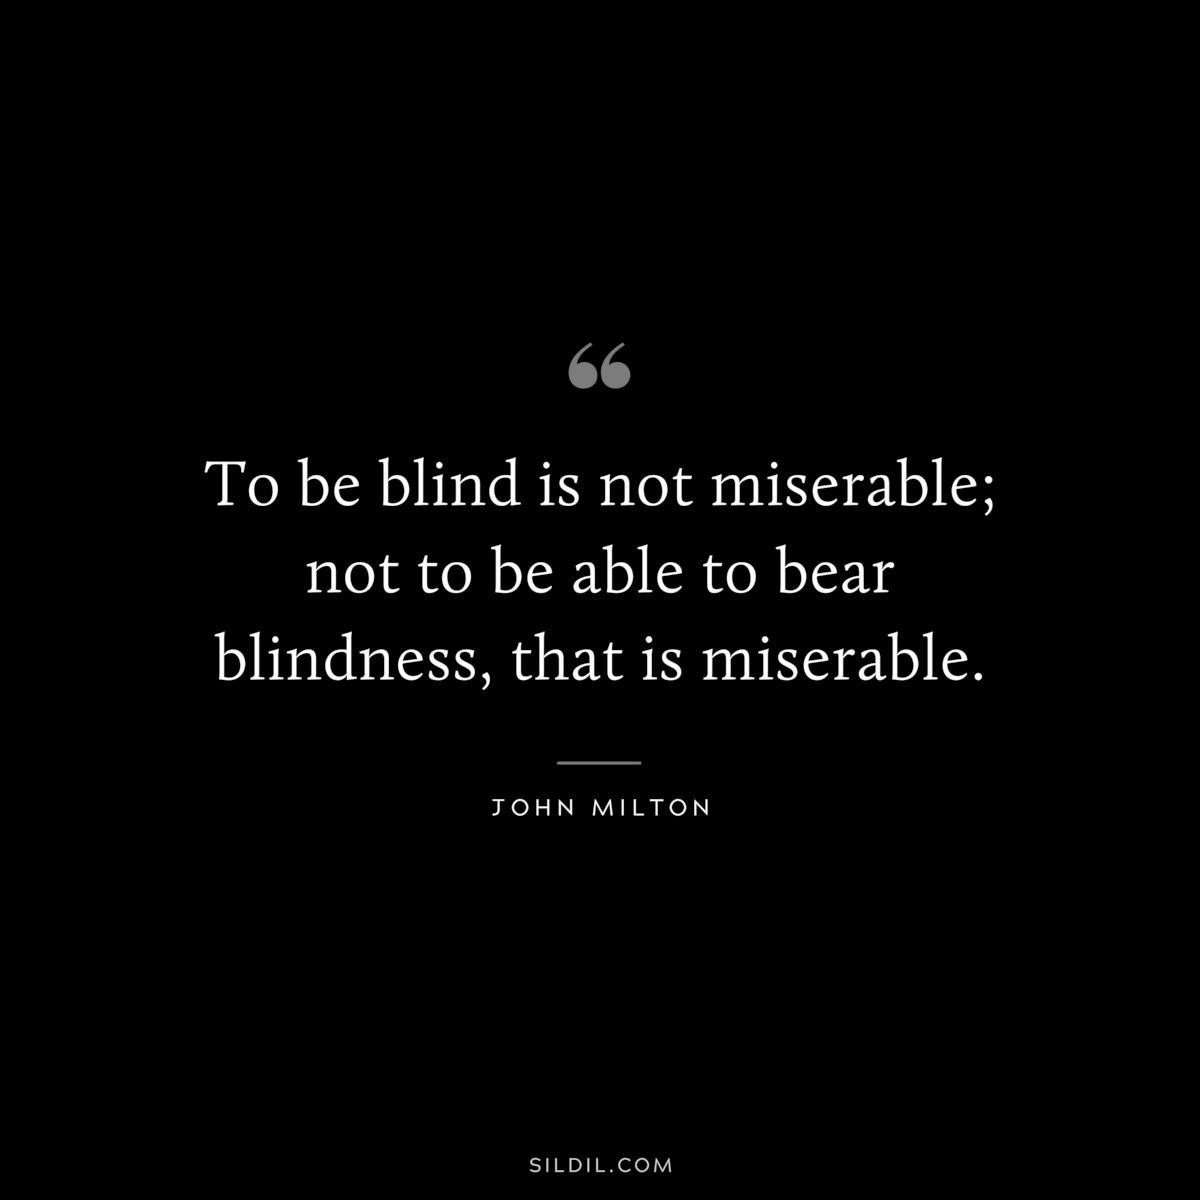 To be blind is not miserable; not to be able to bear blindness, that is miserable. ― John Milton